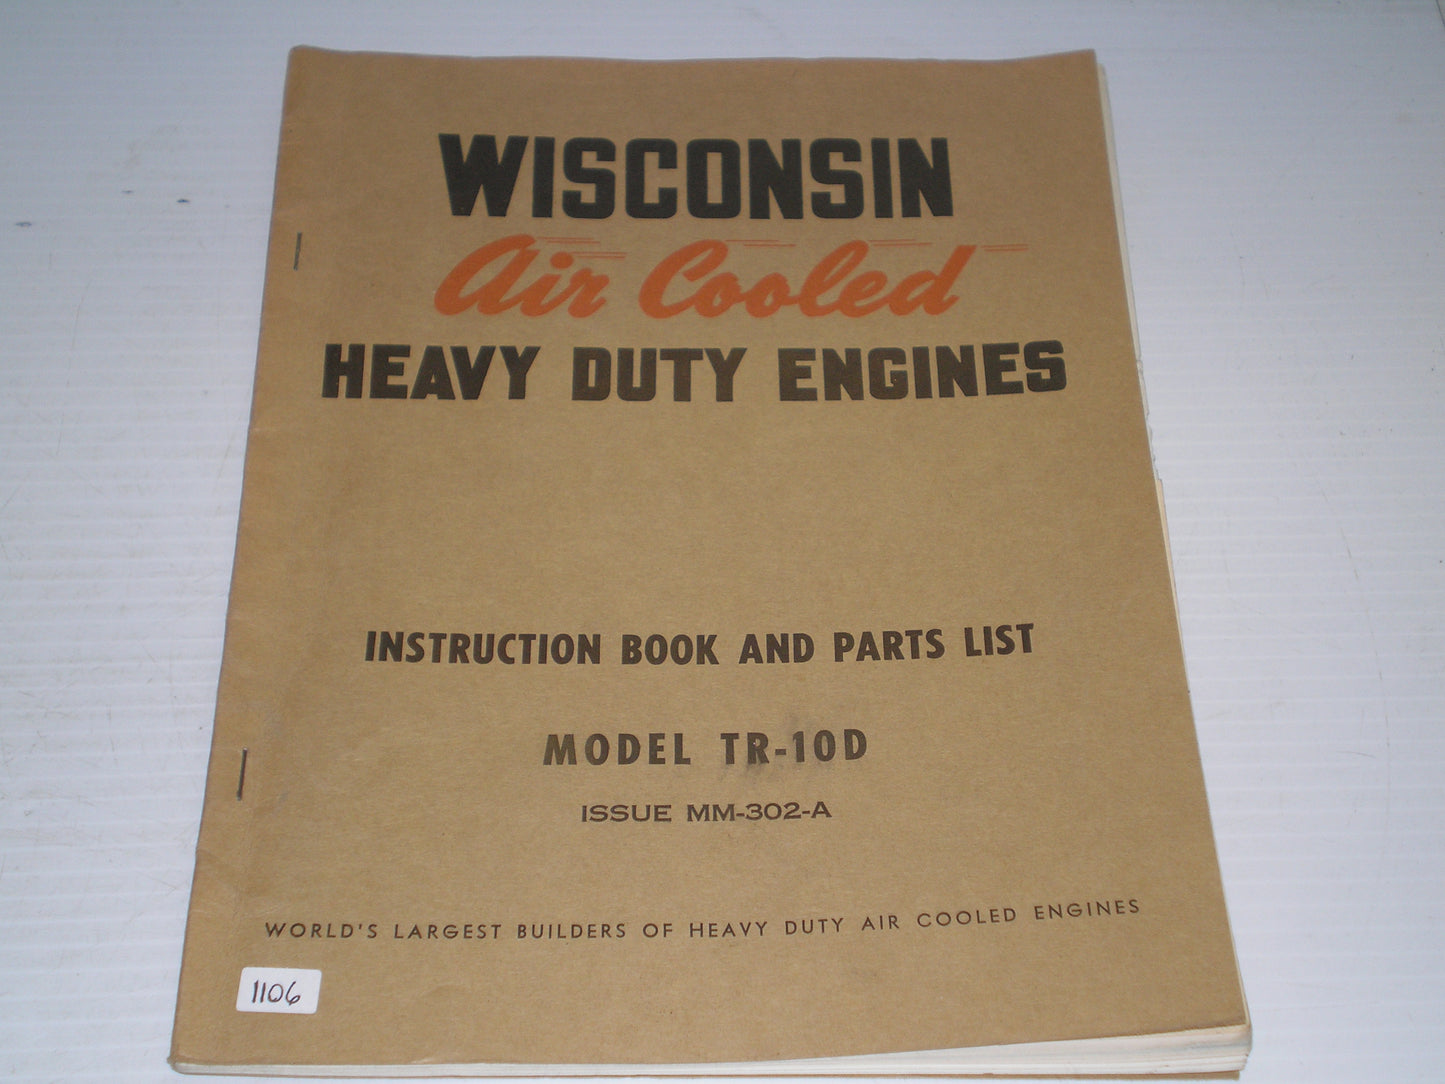 WISCONSIN Air Cooled Heavy Duty Engines  TR10D  TR-10D  Service Manual & Parts List  MM-302-A    #1106